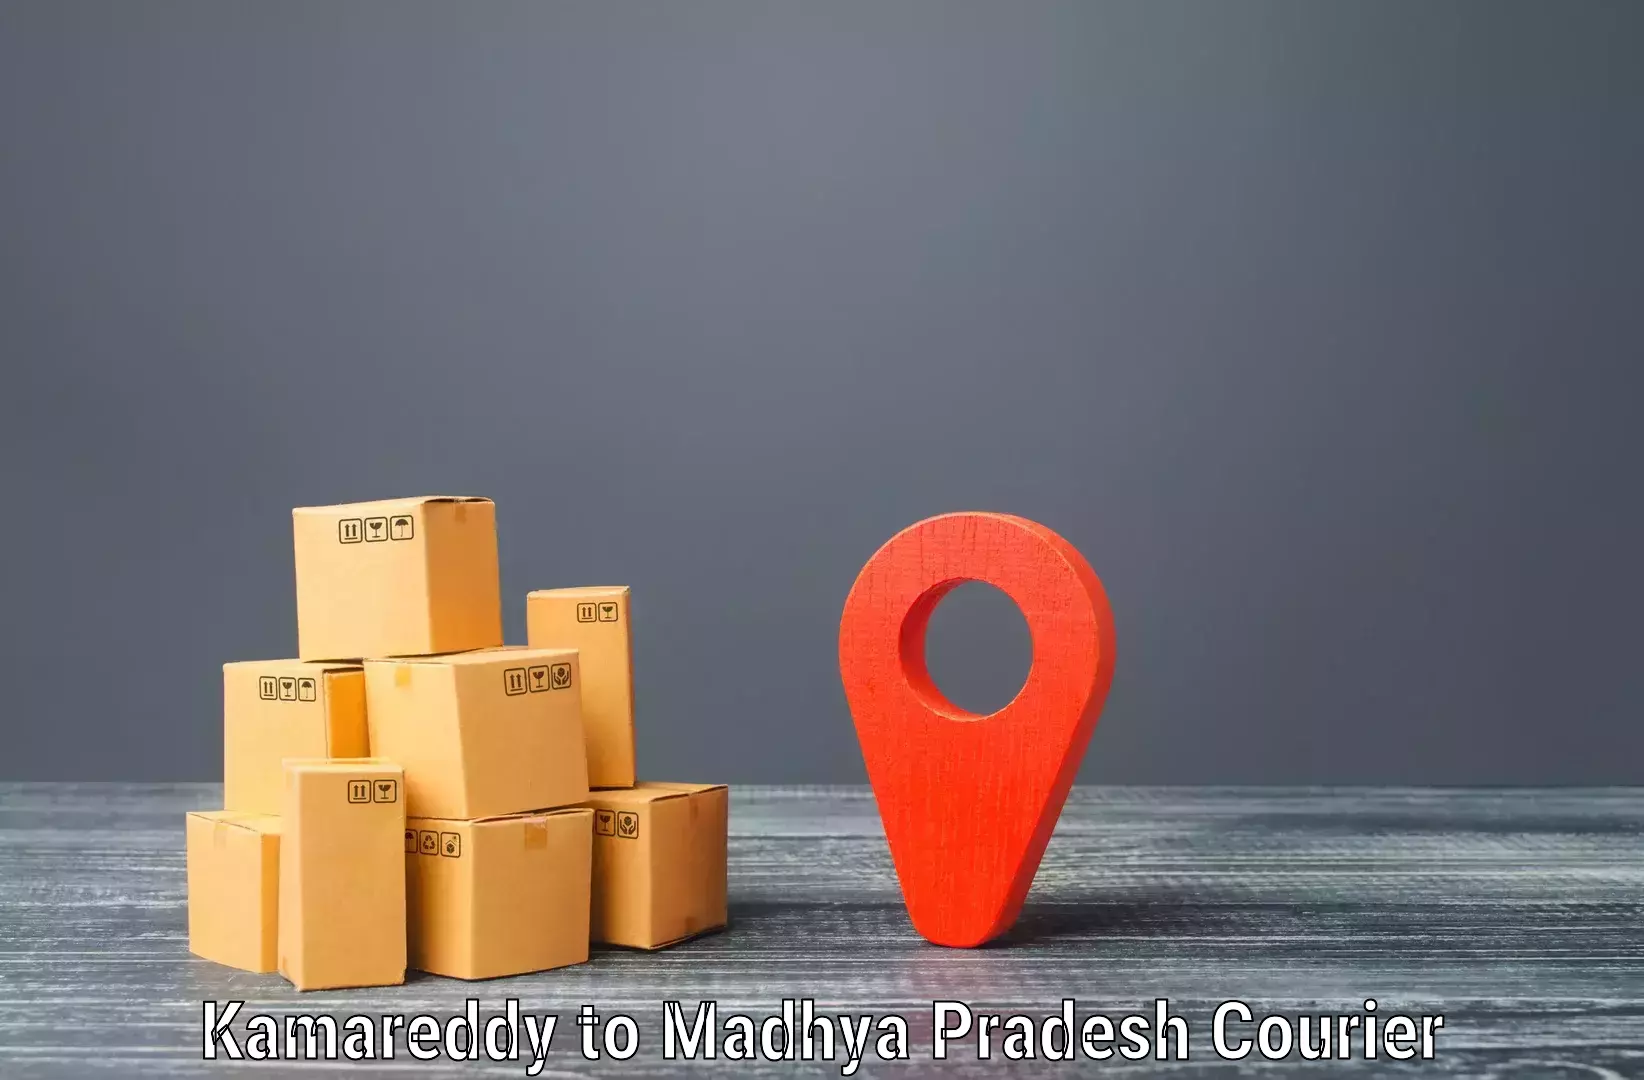 Reliable logistics providers Kamareddy to Bhopal